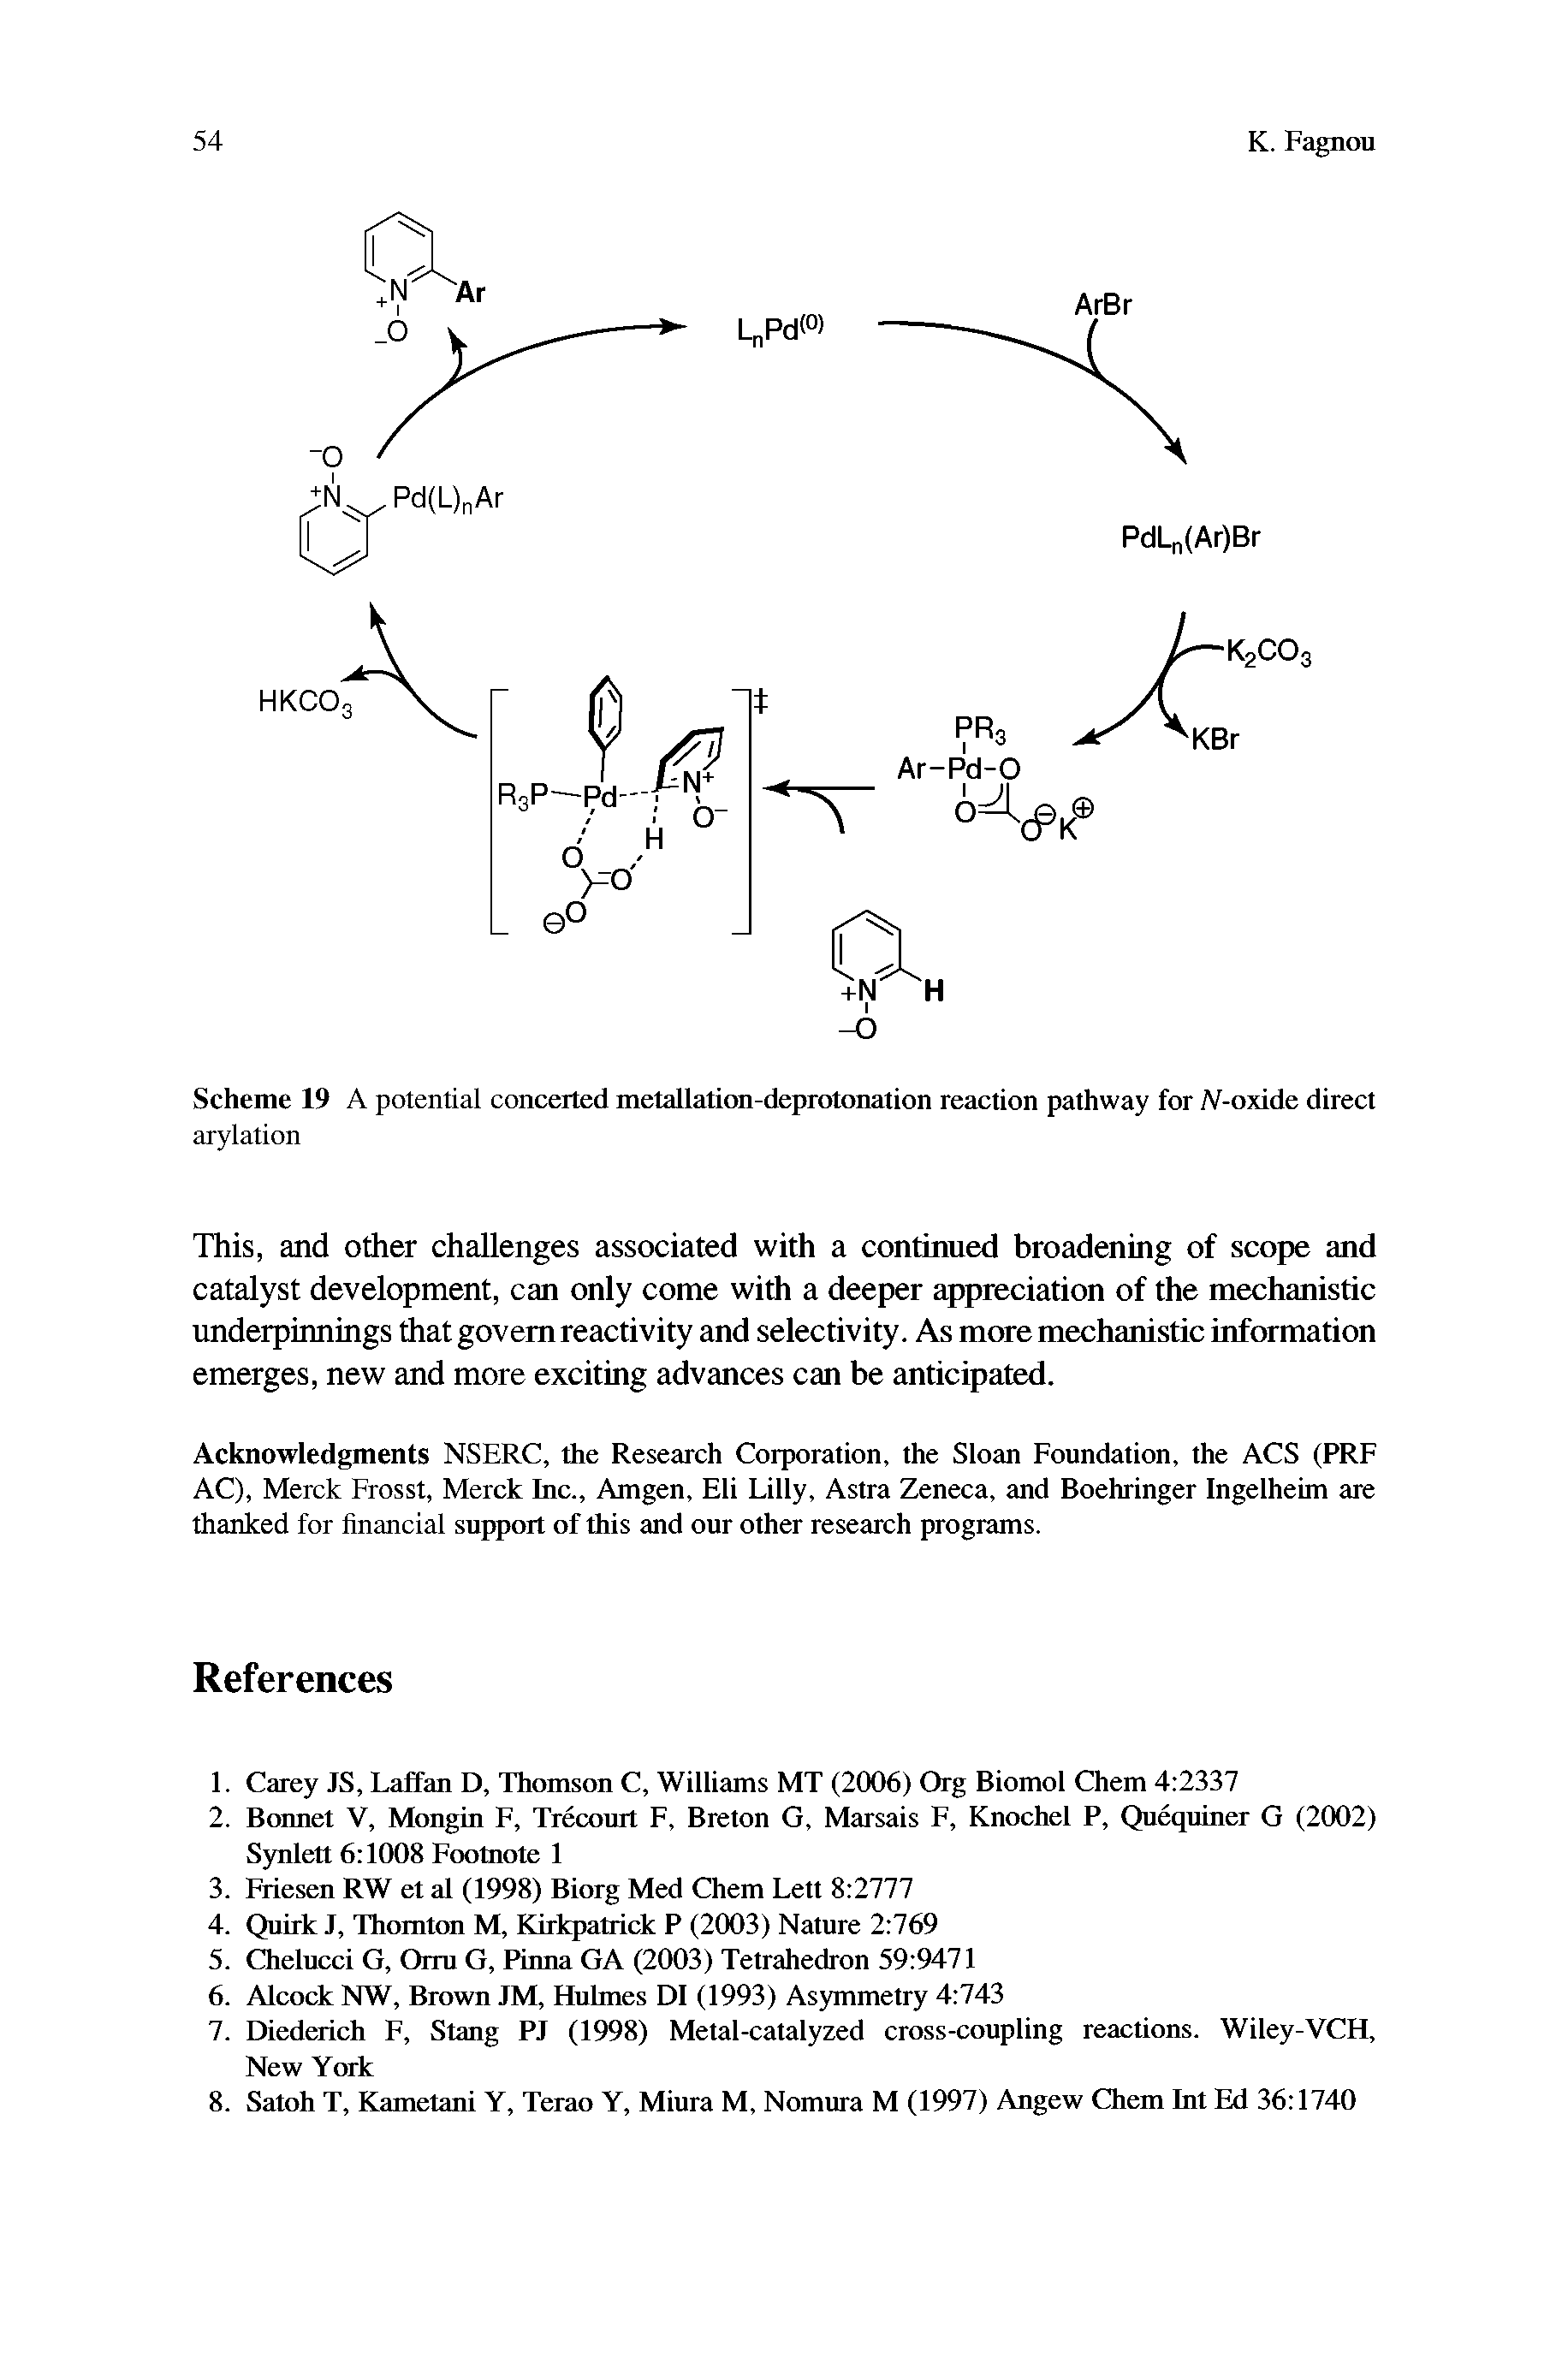 Scheme 19 A potential conceited metallation-deprotonation reaction pathway for IV-oxide direct arylation...